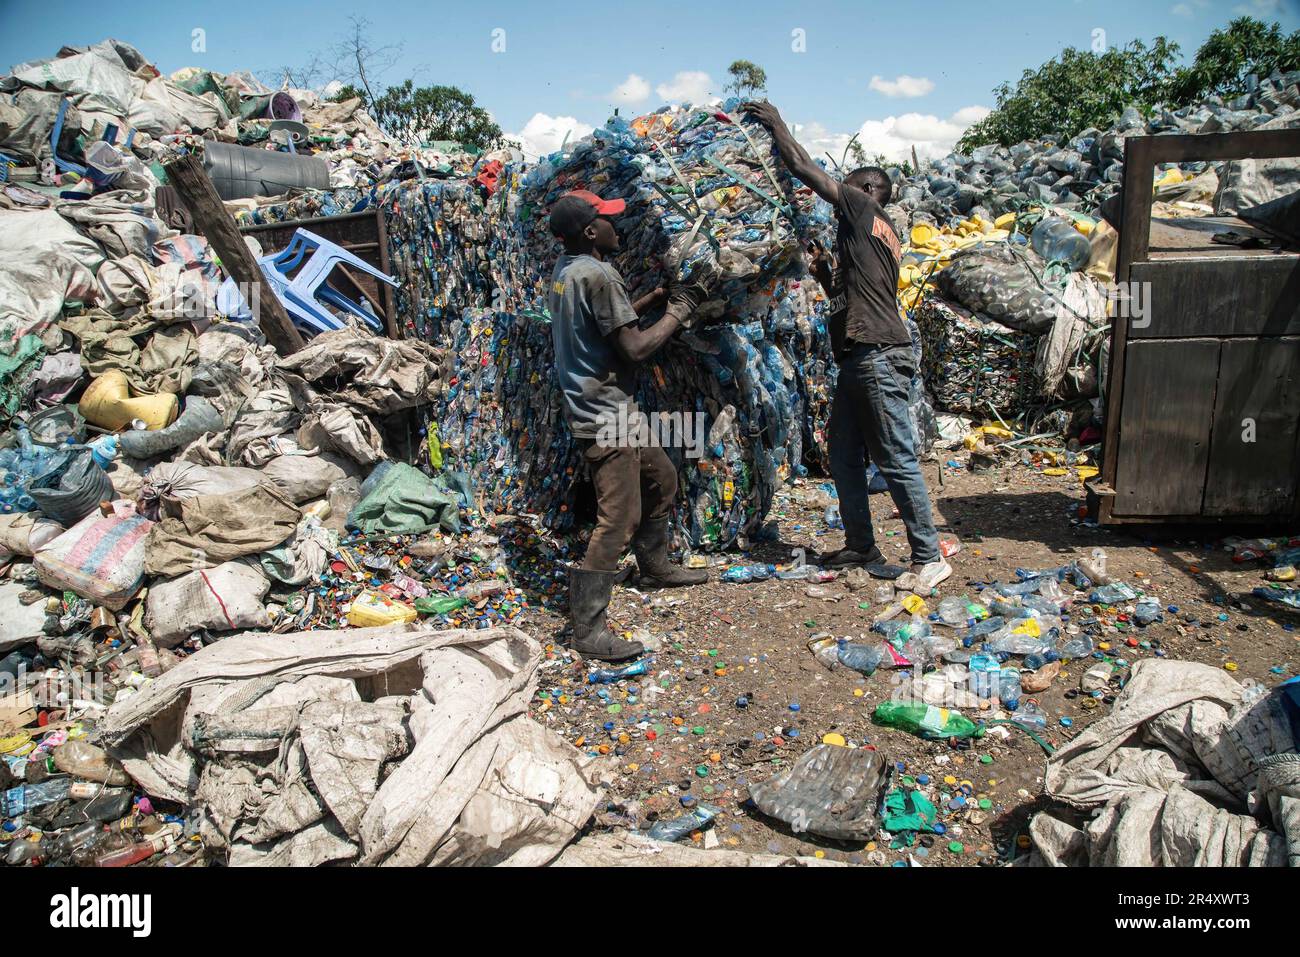 Workers move a bale of plastic bottles at a recycling plant in Nakuru. Negotiators have gathered in Paris, France for the second round of deliberations to develop a global treaty aimed at tackling the escalating issue of plastic pollution. According to a recent report by the United Nations Environment Programme (UNEP), countries have the potential to reduce plastic pollution by 80% by 2040 by eliminating unnecessary plastics, implementing recycling and reuse strategies, introducing deposit return schemes, and substituting plastic with sustainable alternative materials. (Photo by James Wakibia Stock Photo